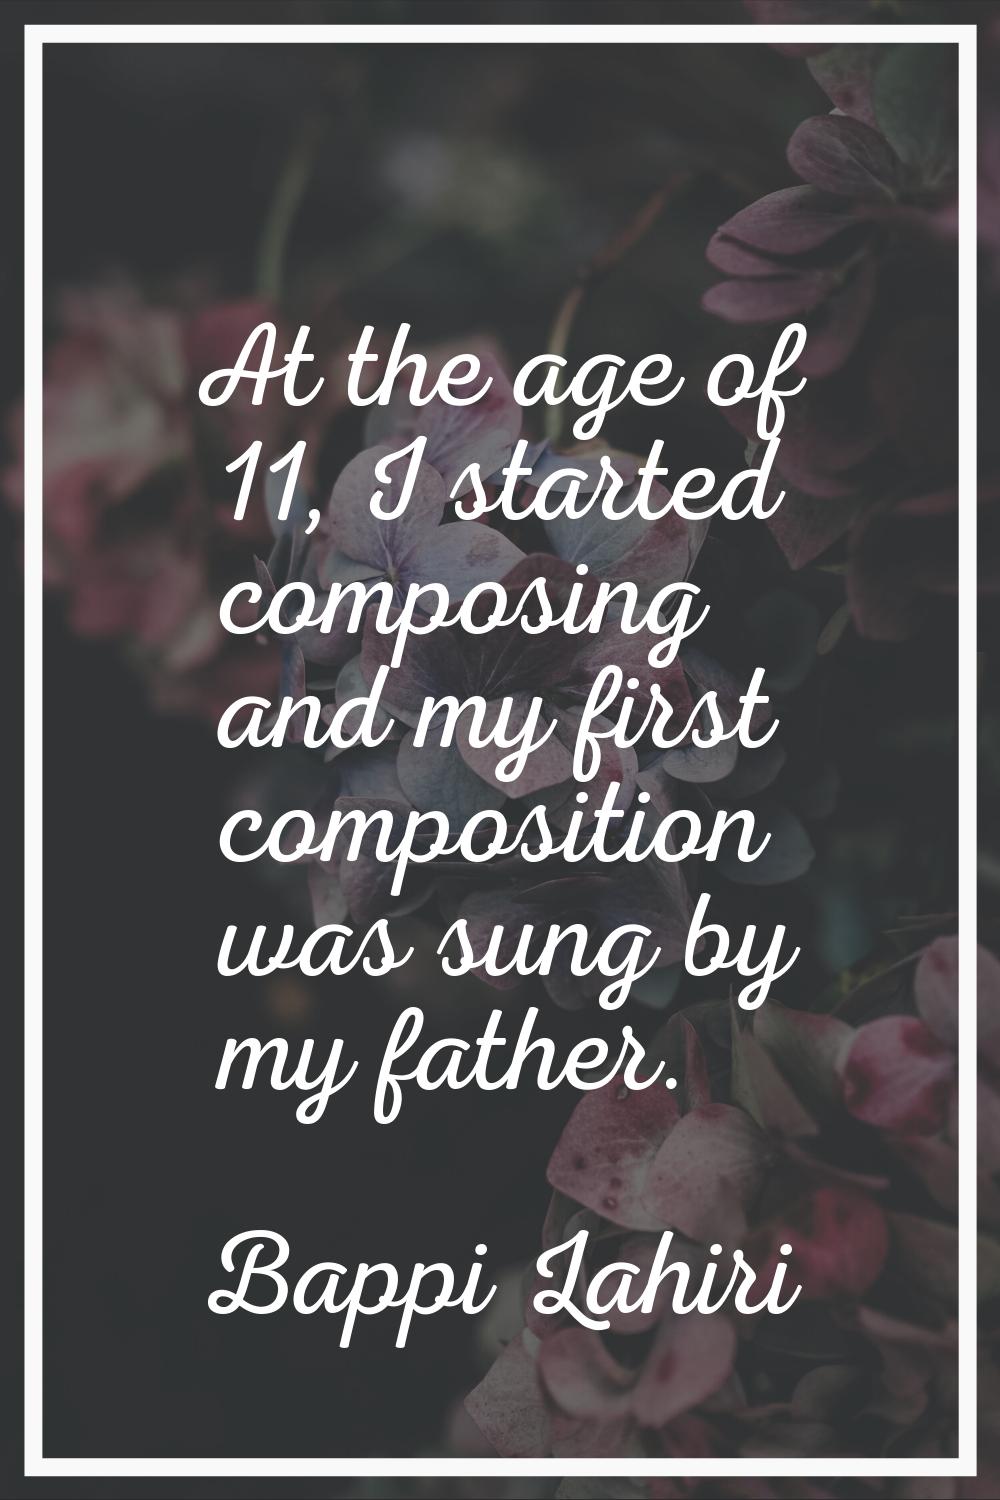 At the age of 11, I started composing and my first composition was sung by my father.